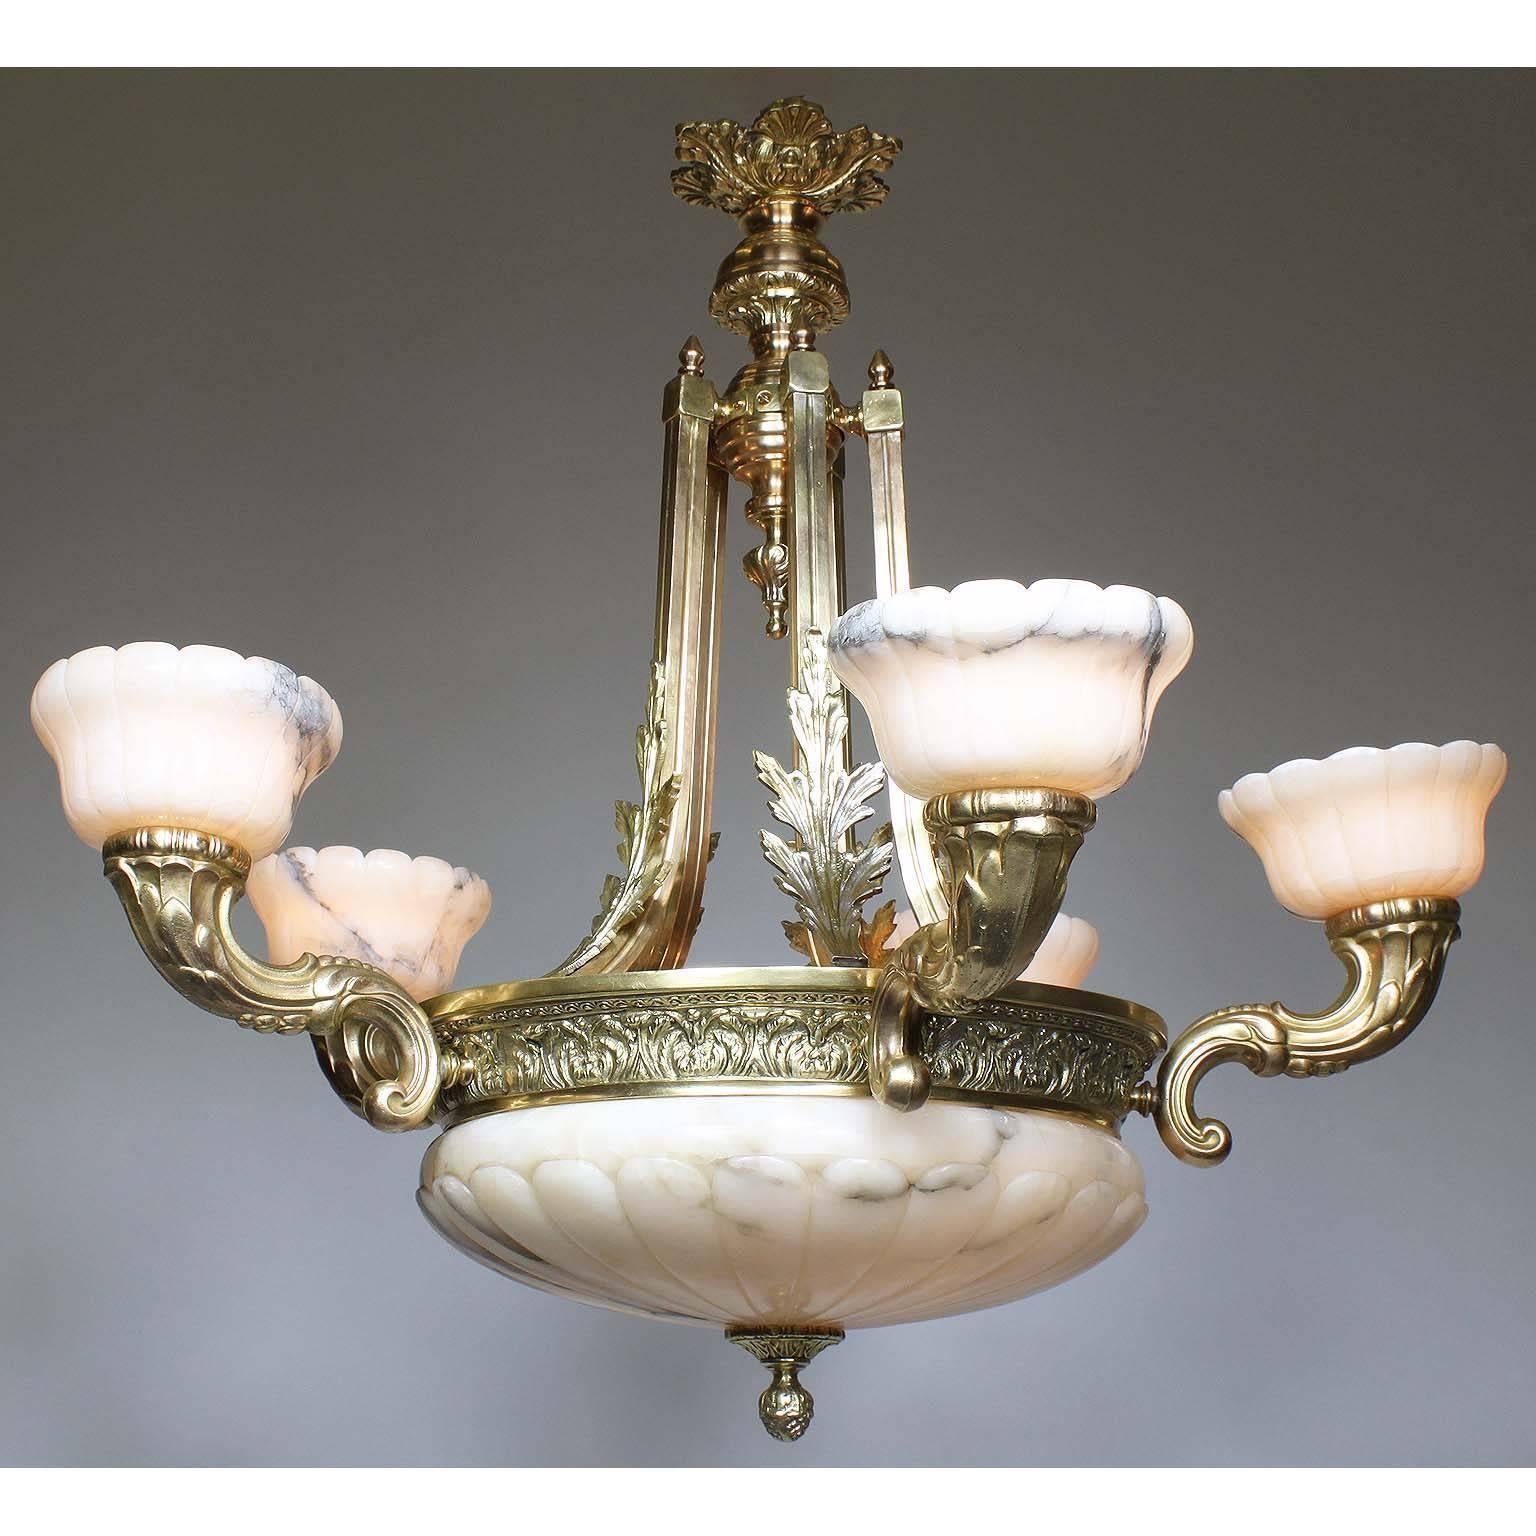 A French 20th century Art Deco style bronze and carved Veined Alabaster five-light chandelier. The carved circular alabaster plafonnier, with two interior lights and a finial drop, surmounted by five scrolled cornucopia shaped lights, all fitted